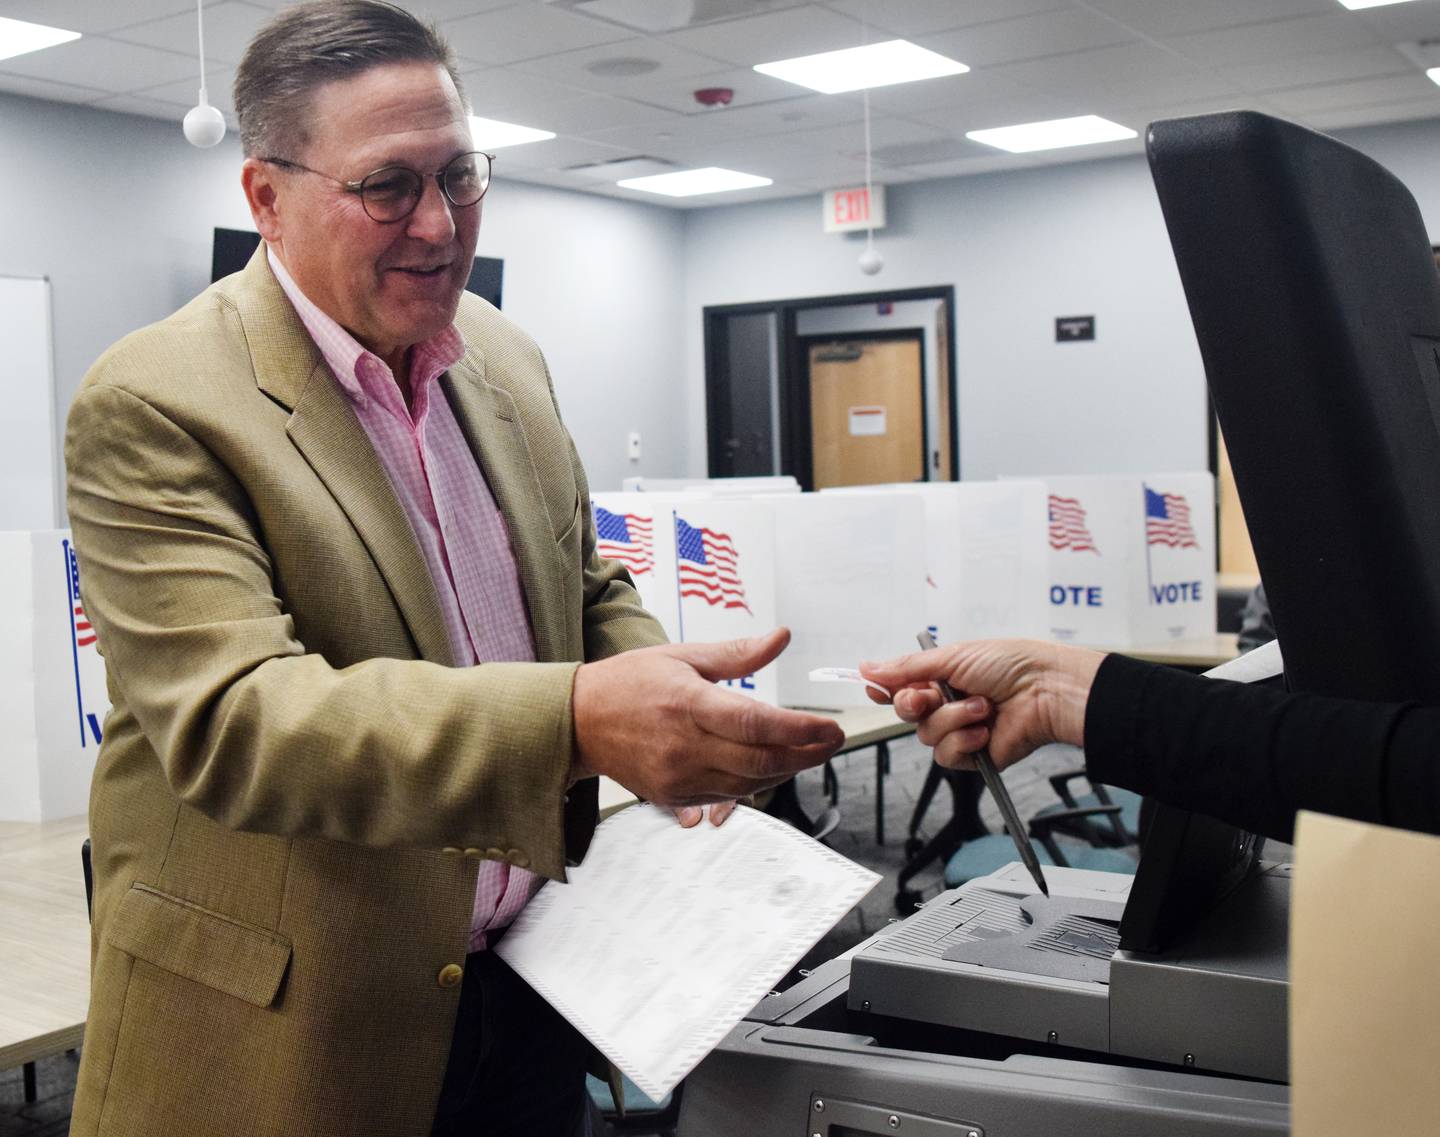 Rep. Jon Dunwell, the Republican incumbent running for Iowa House District 38, receives his sticker after voting at the precinct in the Jasper County Administration Building on Nov. 8 in Newton.